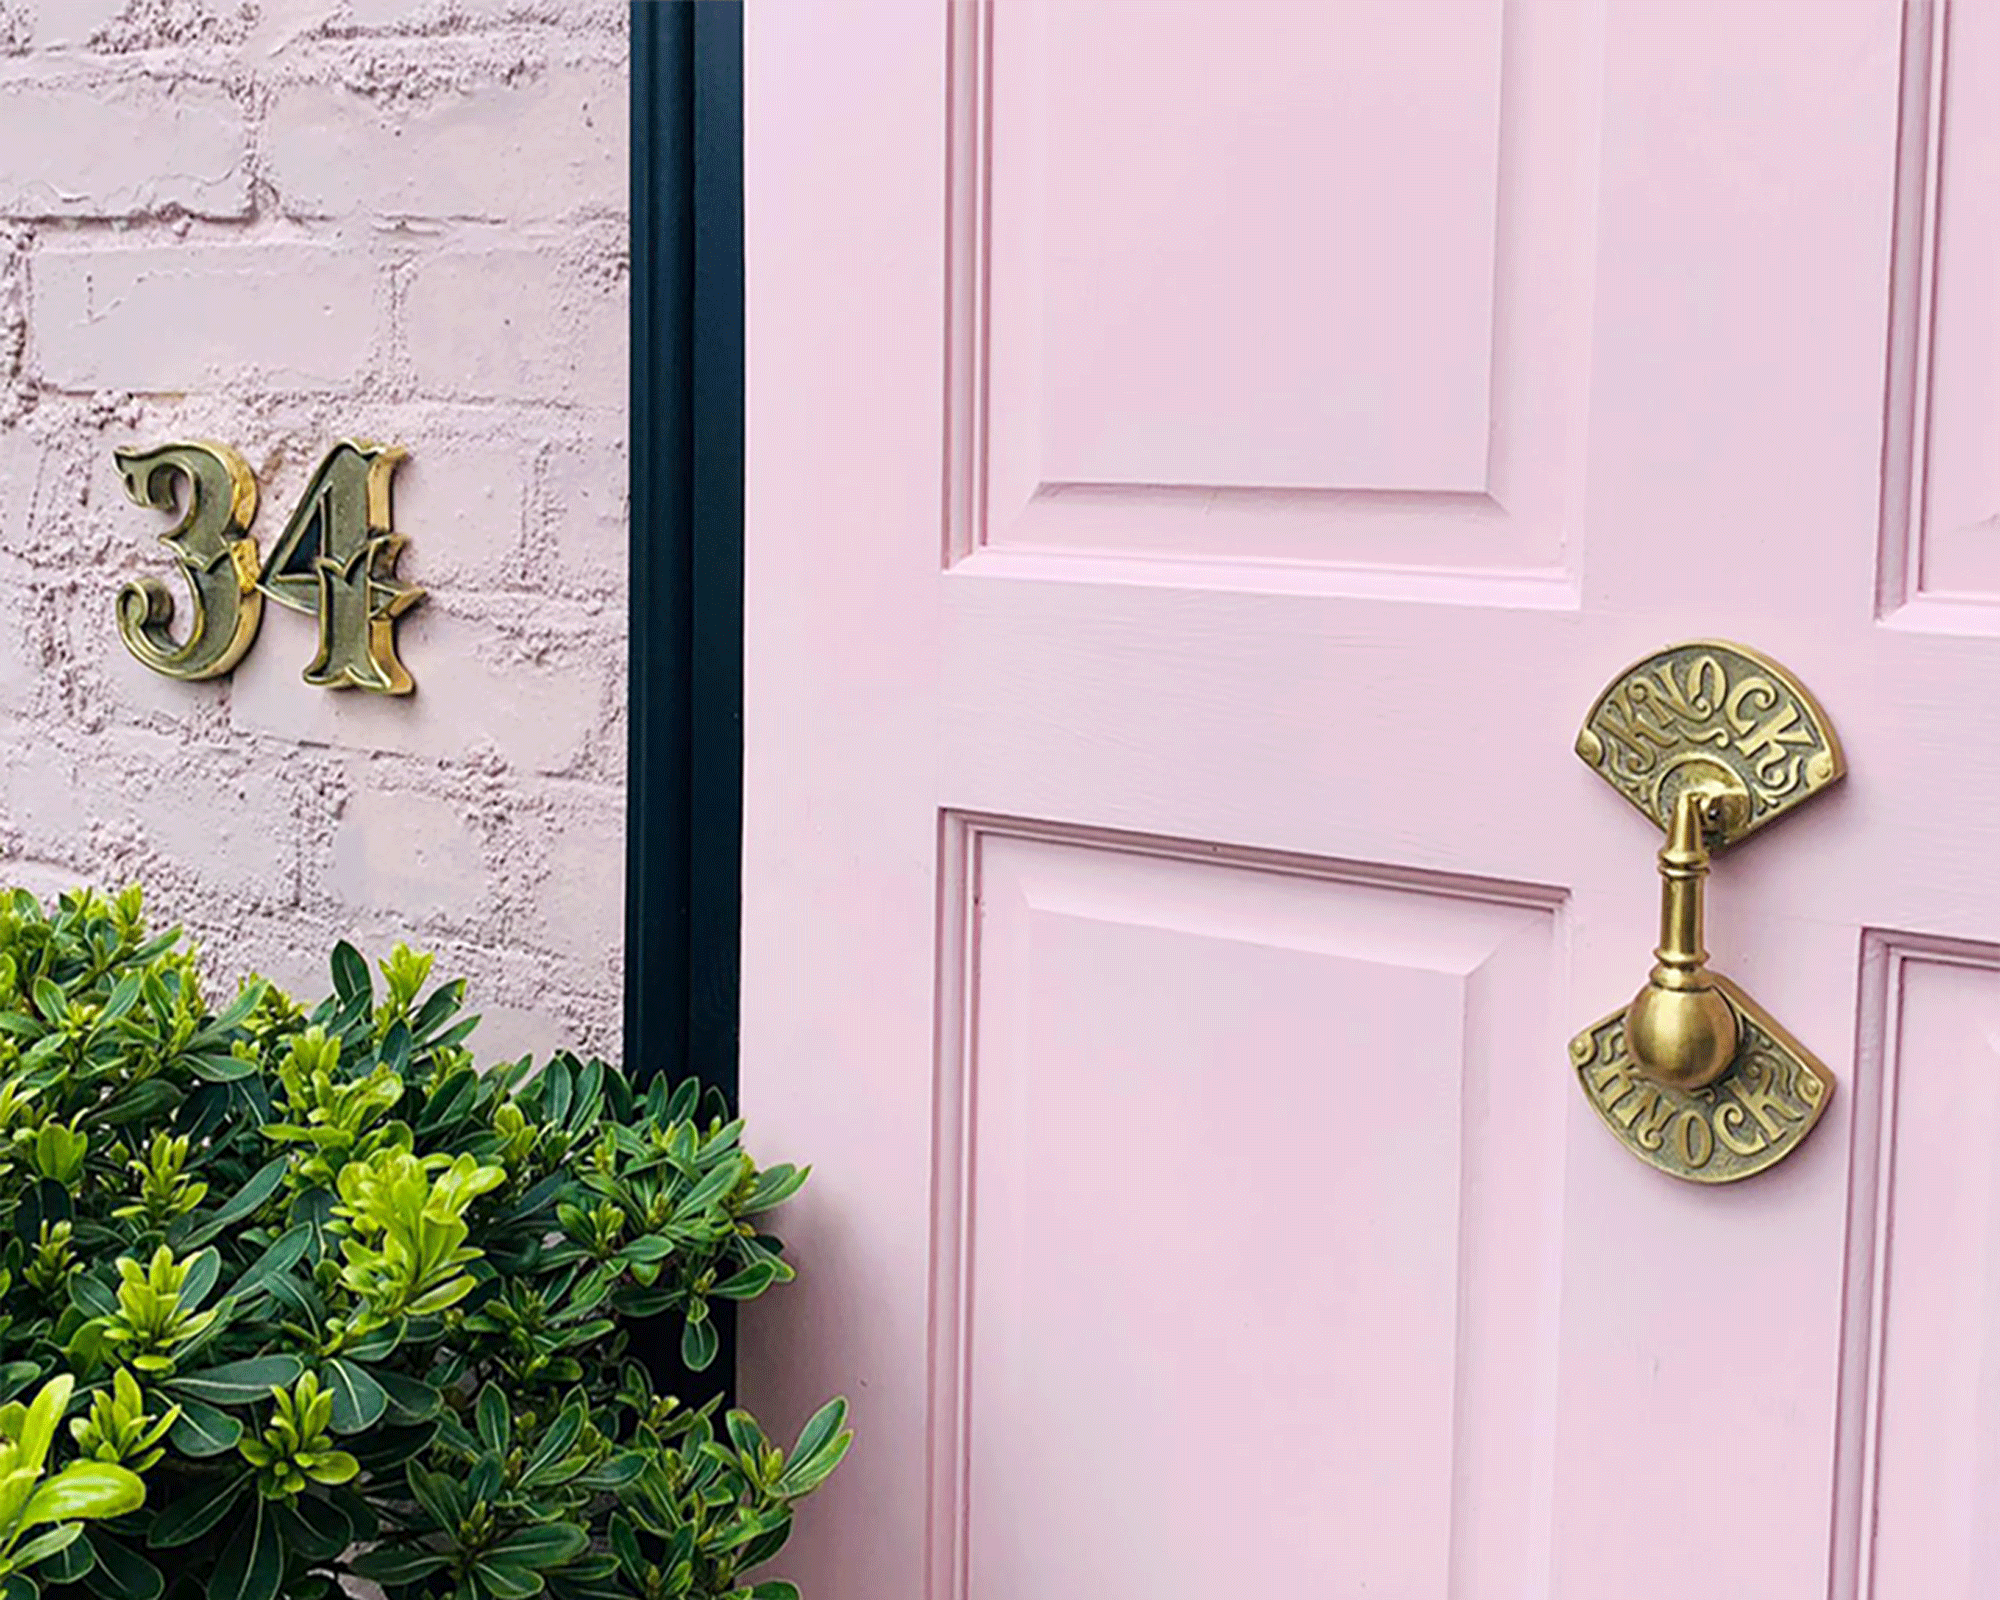 Pink front door with decorative brass knocker and house numbers.